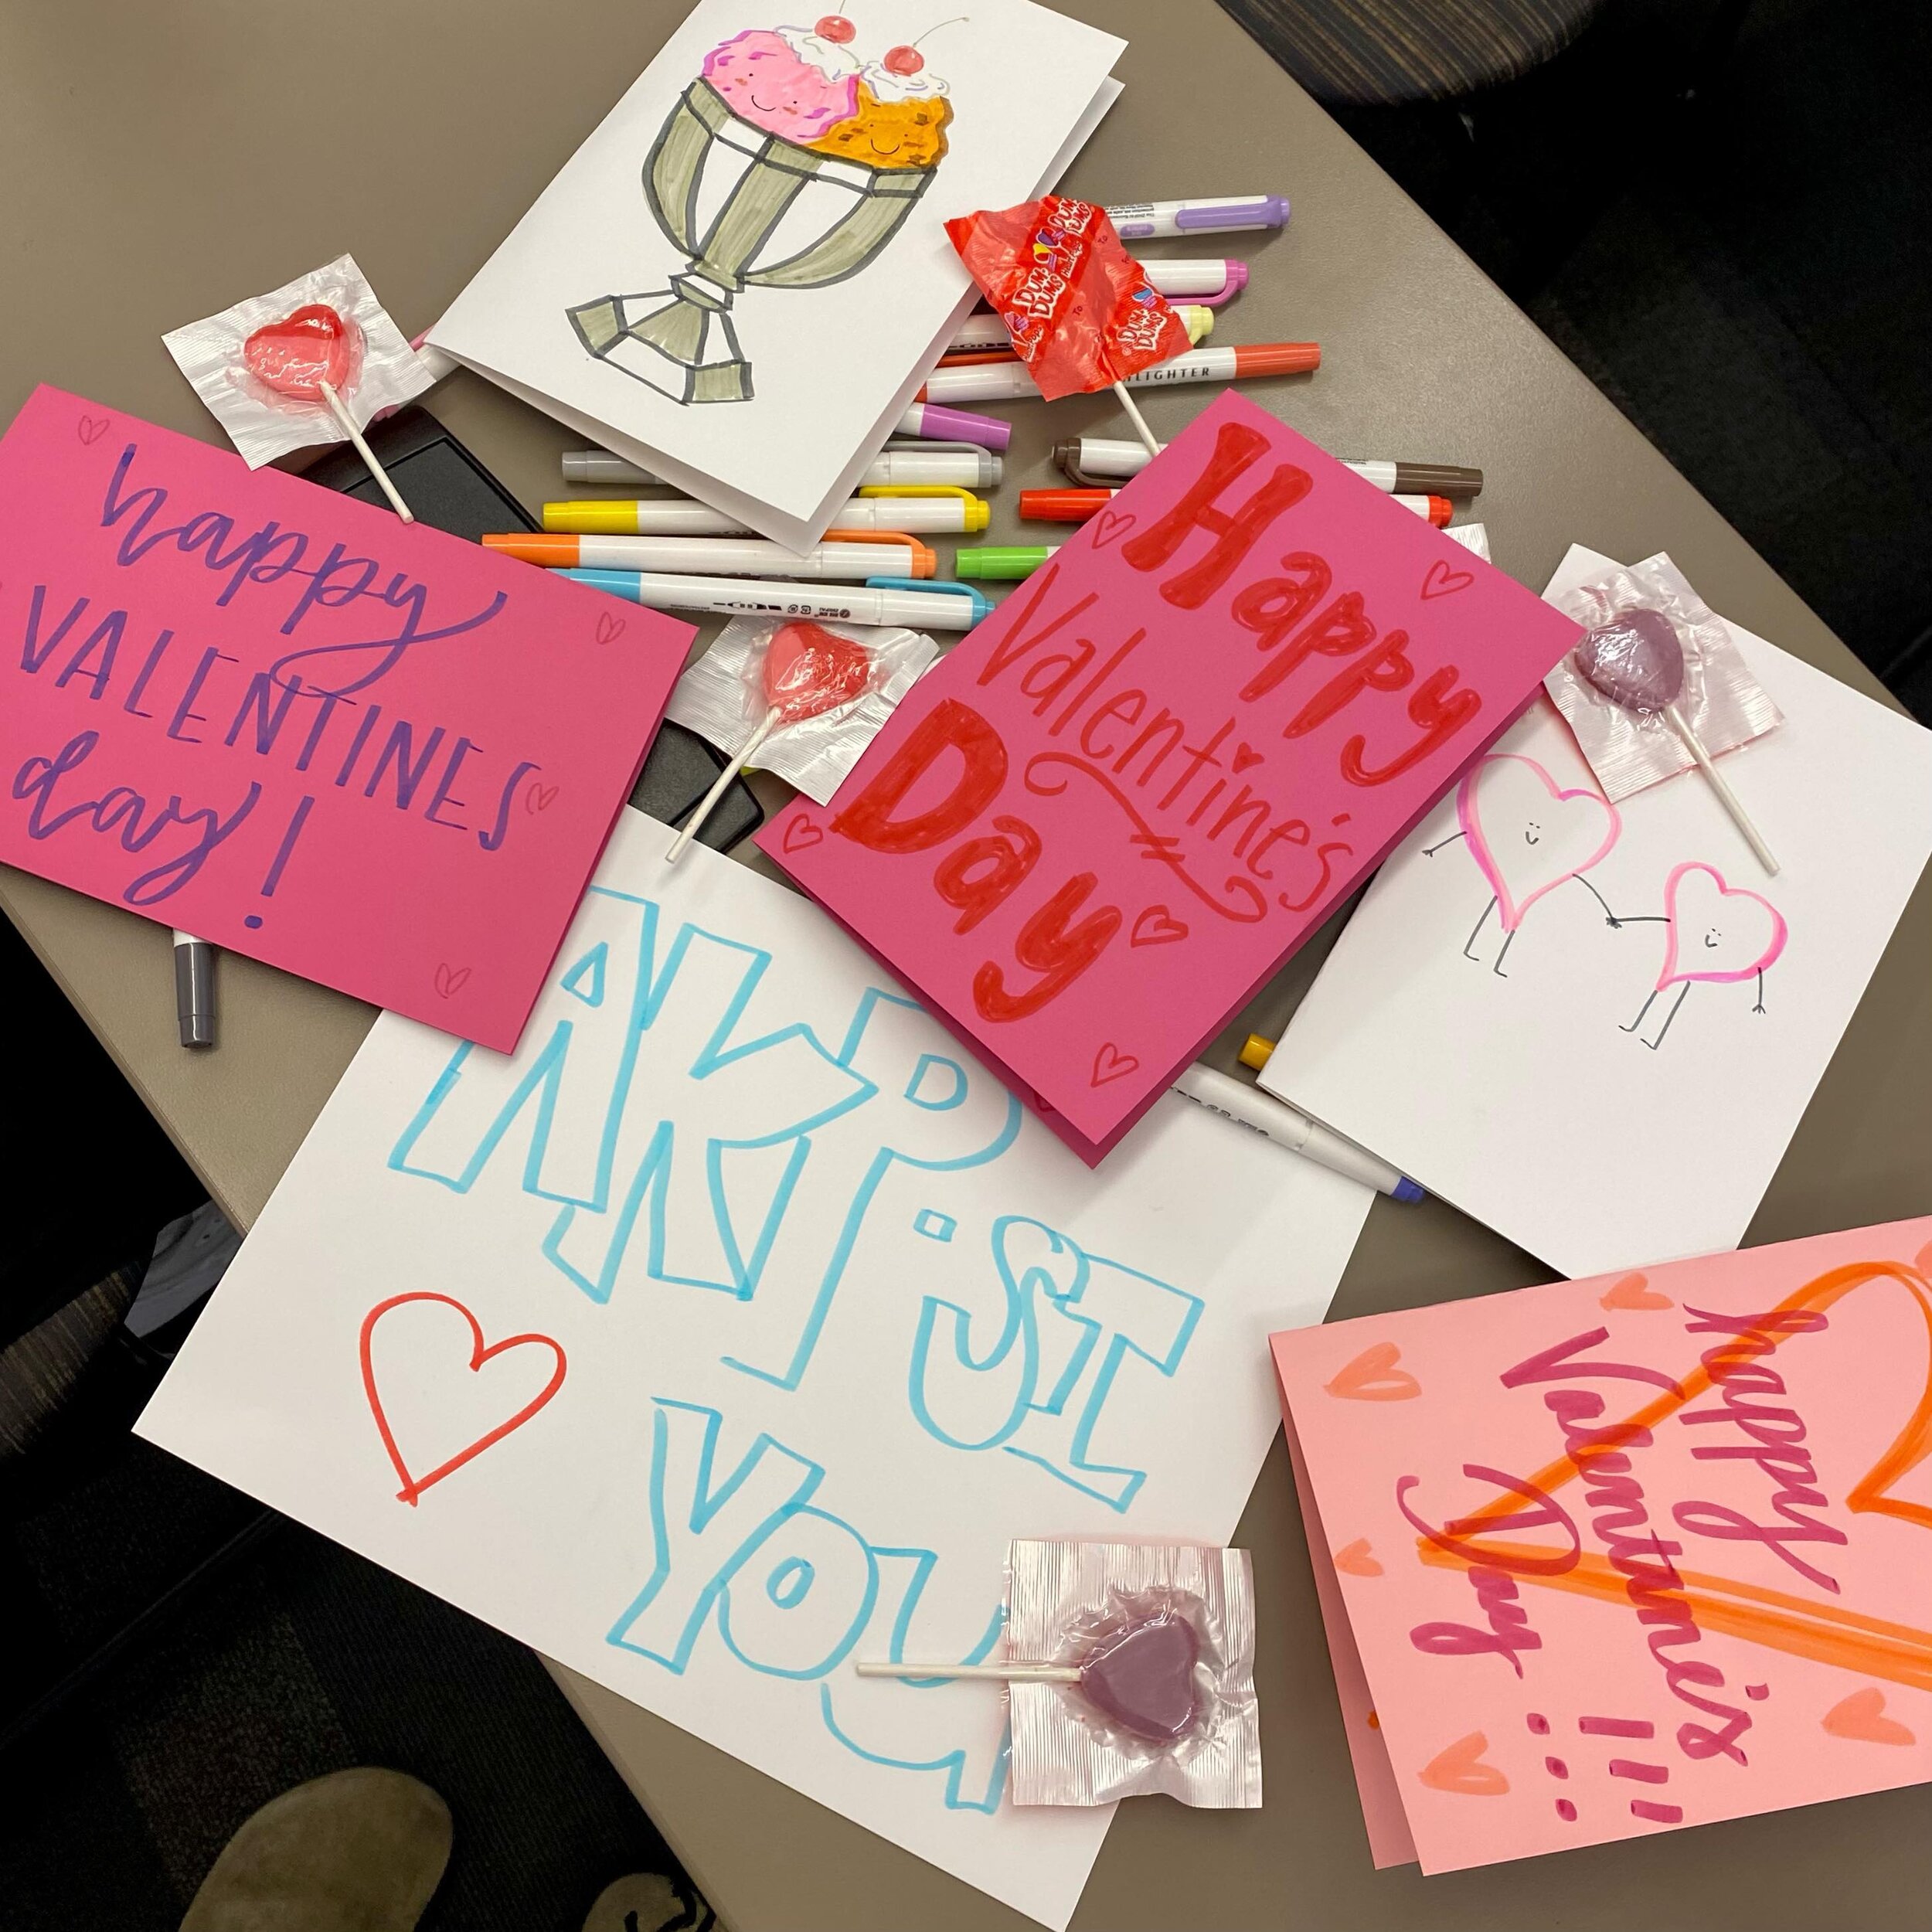 We hope you all had a loving Valentine&rsquo;s Day yesterday💙

Two chapters ago, we took the time to spread love to our community by making cards for Belmont village senior living!

It was a fun time to combine our values of service, brotherhood, an